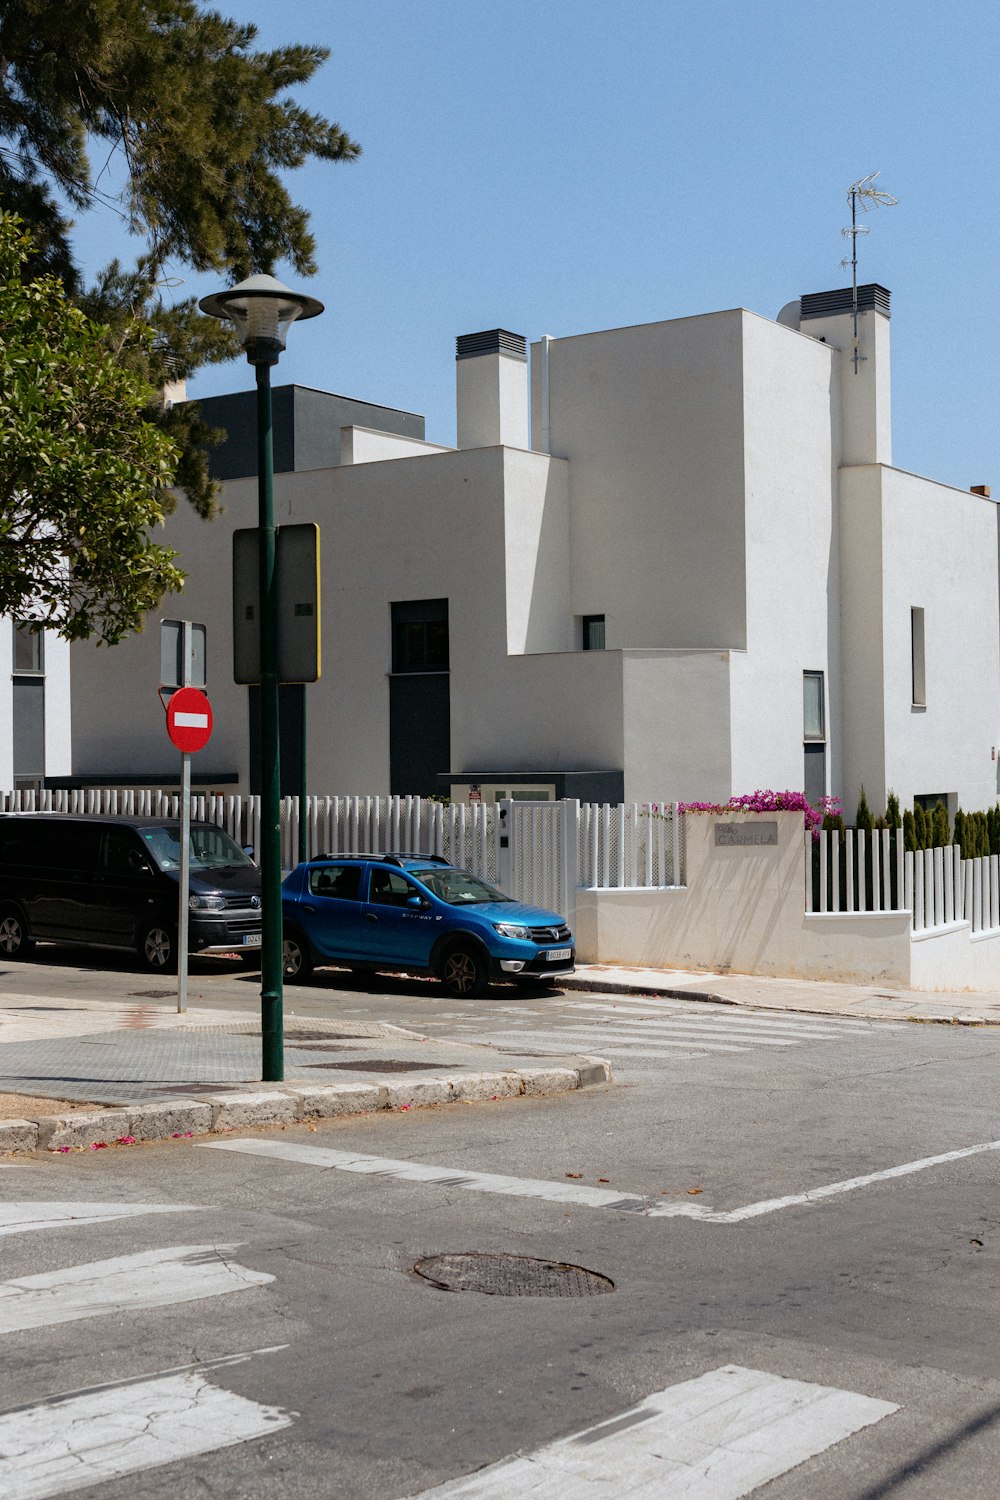 a blue car is parked in front of a white building